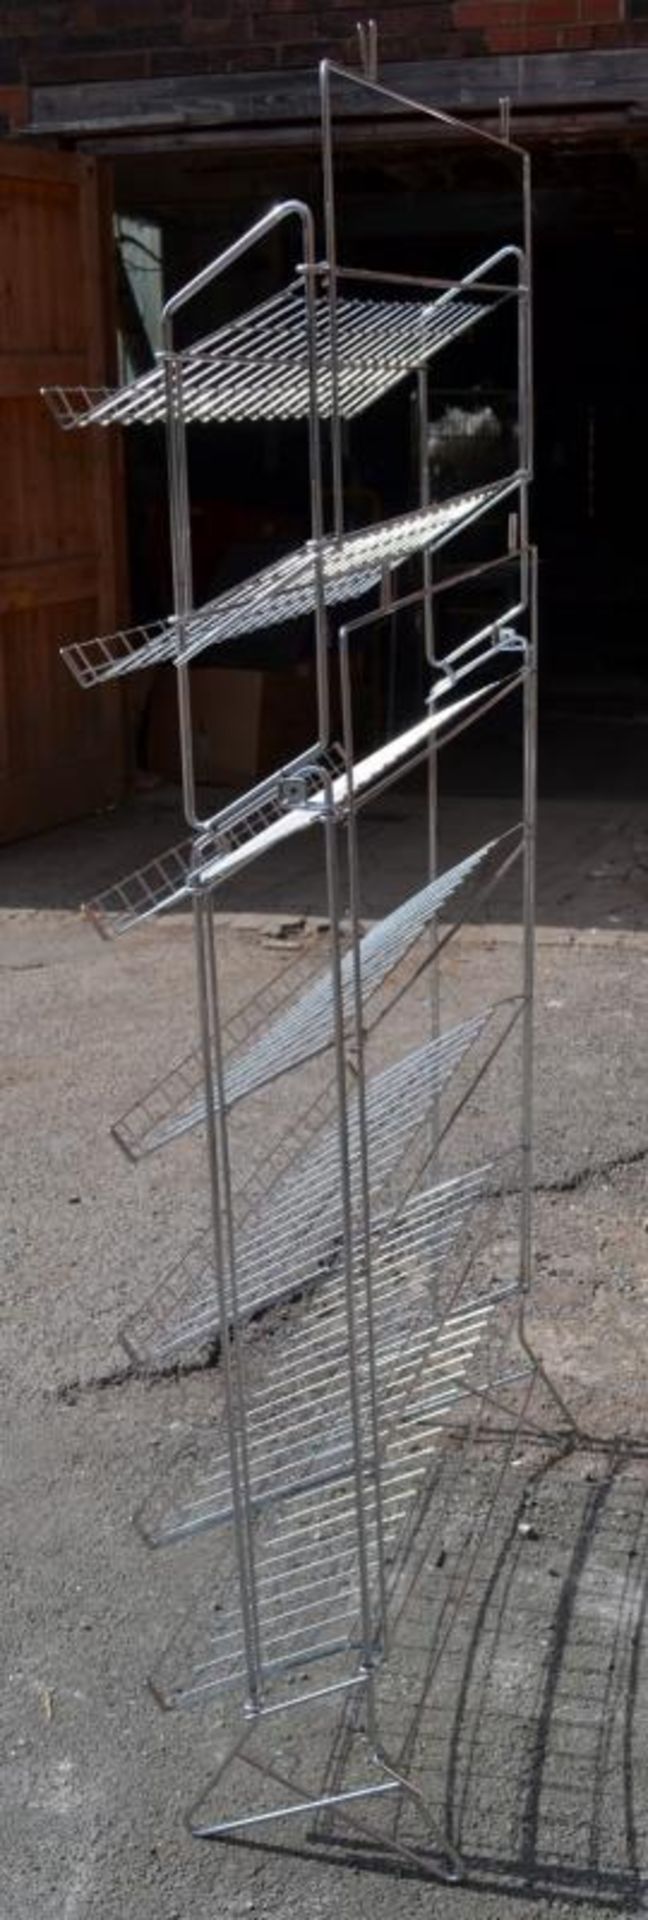 9 x Freestanding Retail Shoe Display Racks - Recently Removed From A Major UK Store - Chrome Finish - Image 2 of 4